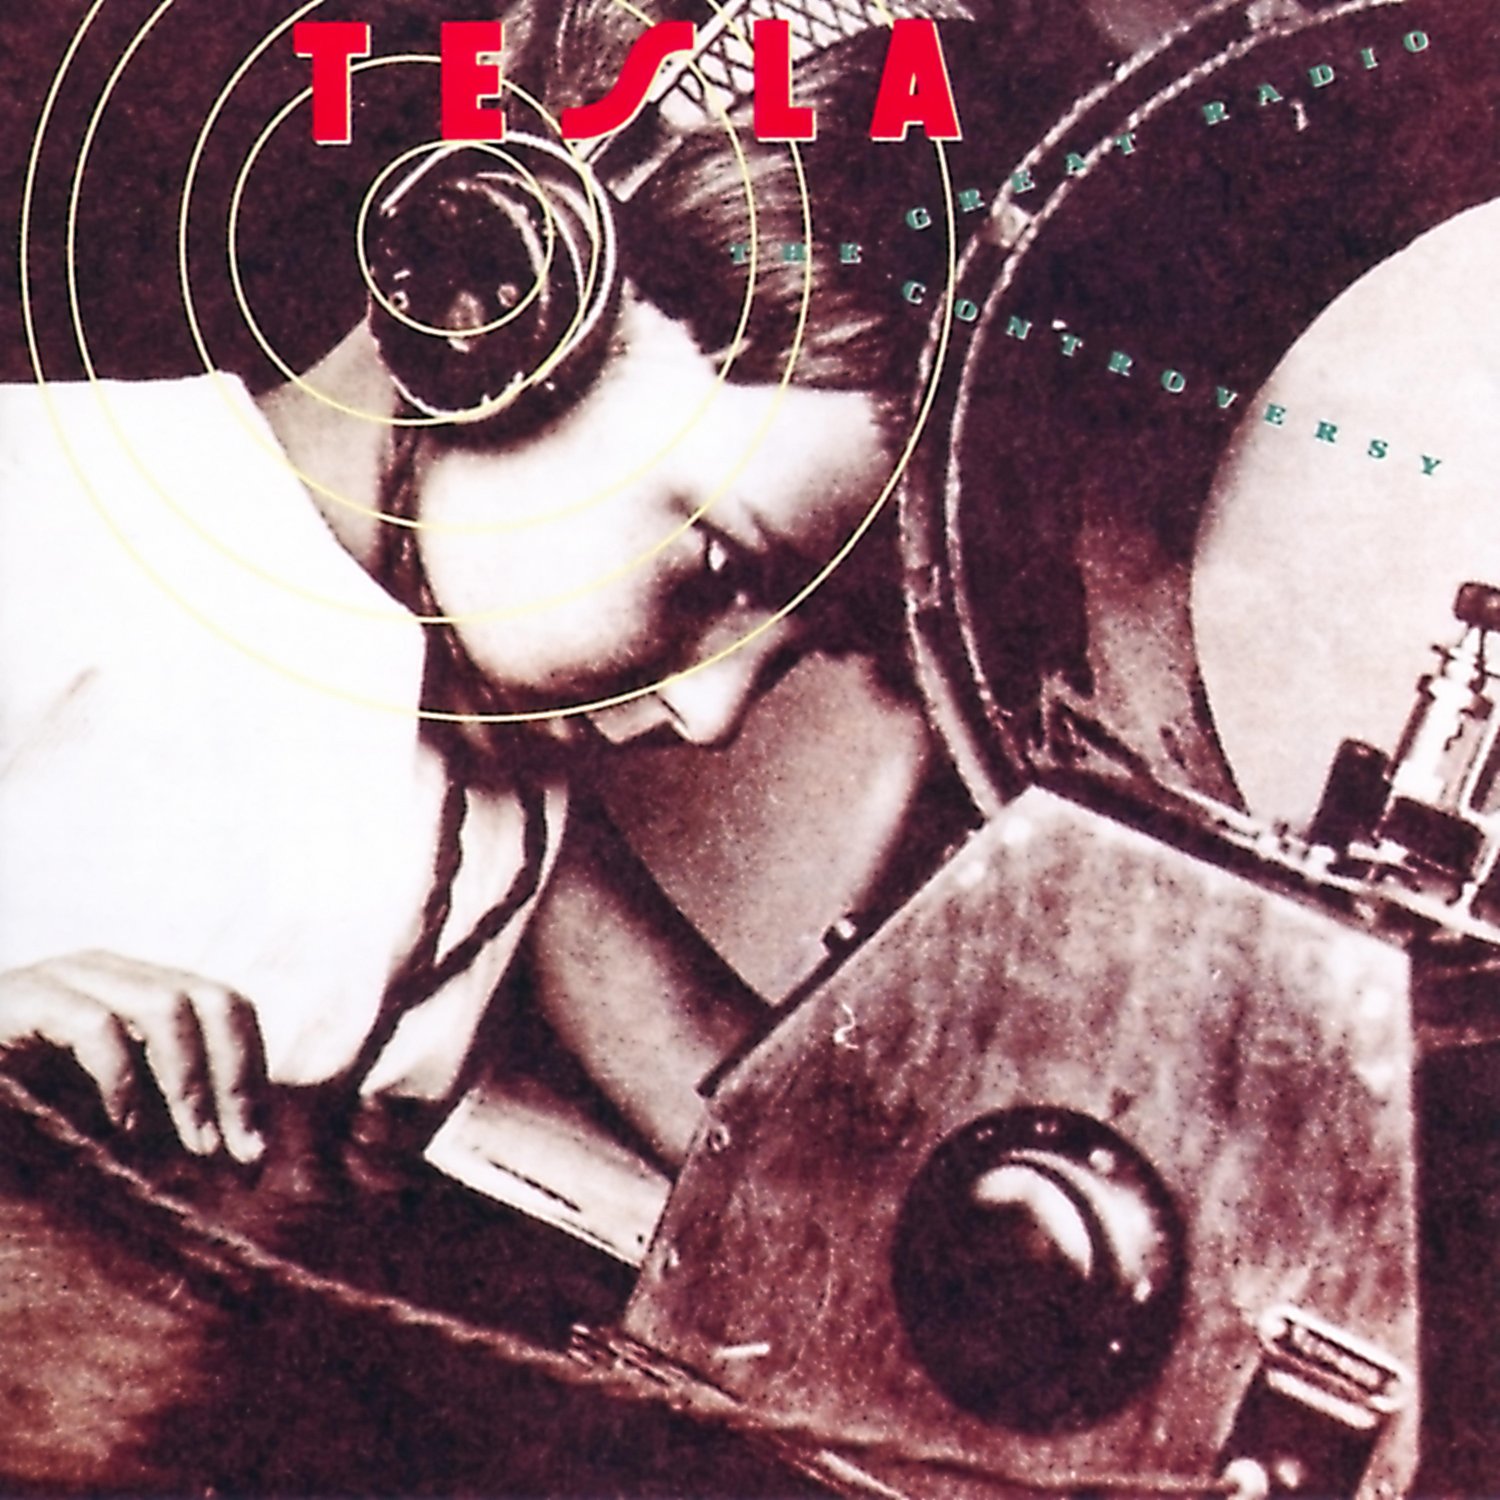 TESLA The Great Radio Controversy BANNER Huge 4X4 Ft Fabric Poster Tapestry Flag album cover art